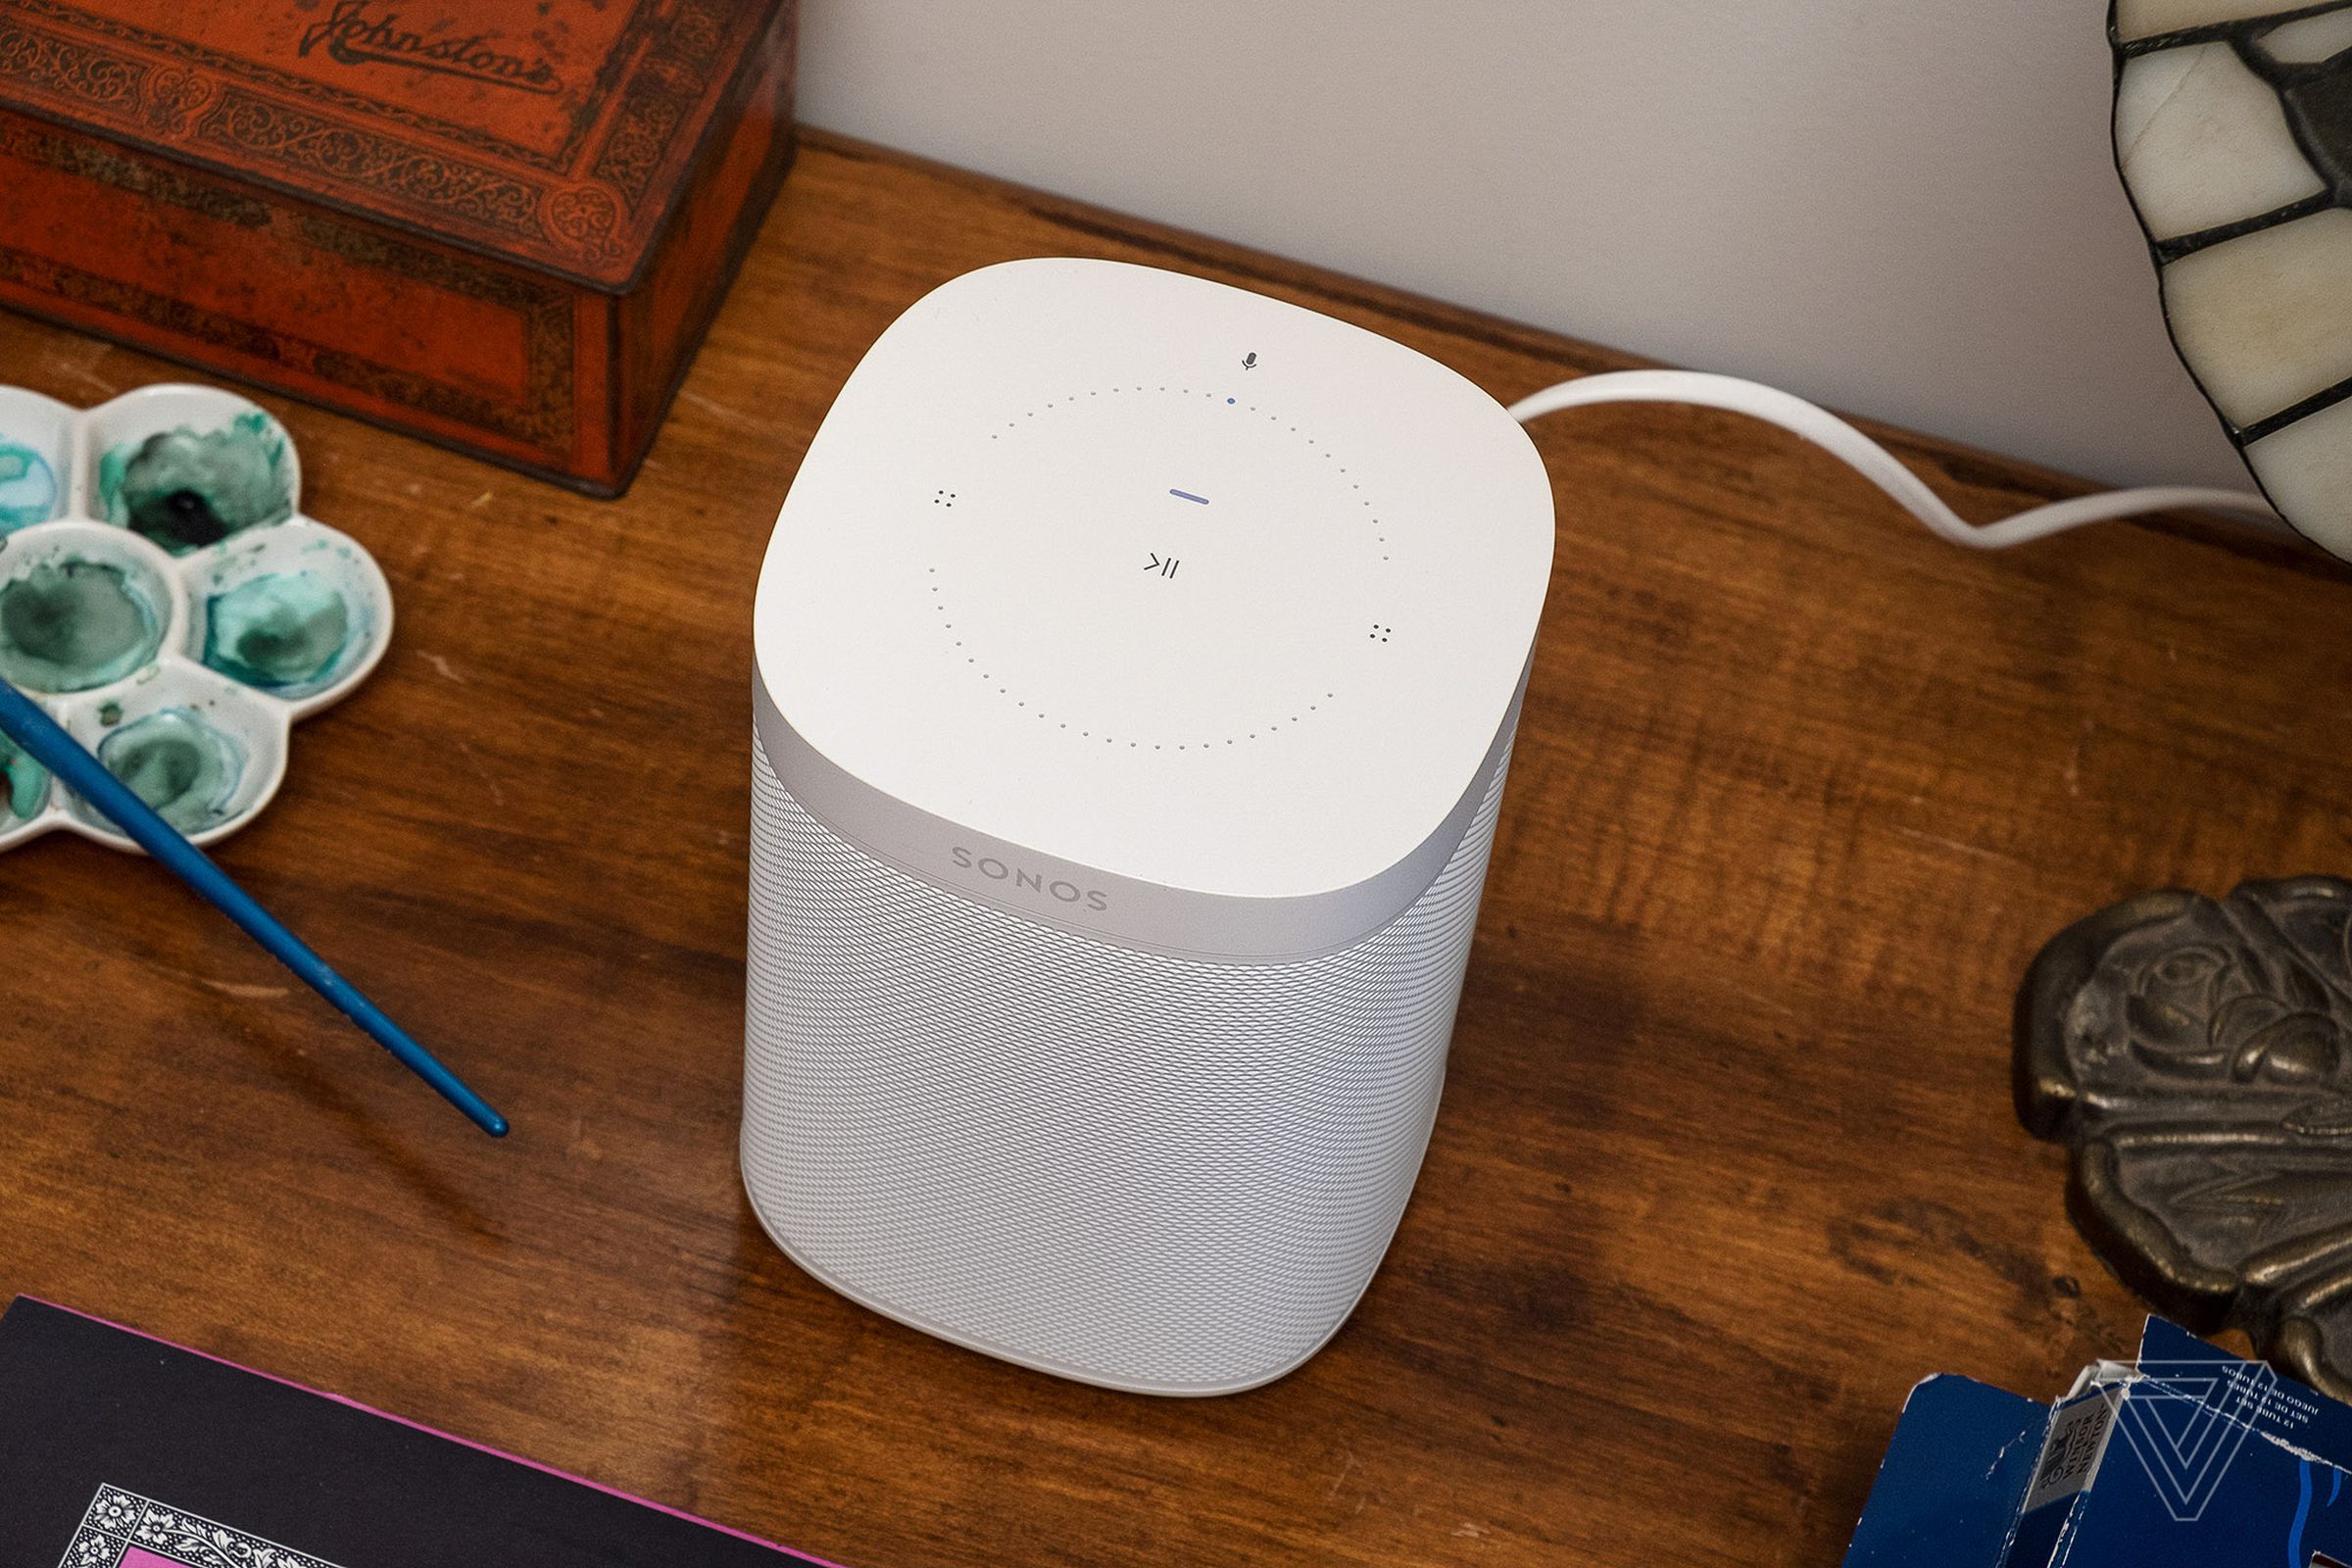 Several Sonos products are cheaper when you buy them refurbished through the company.